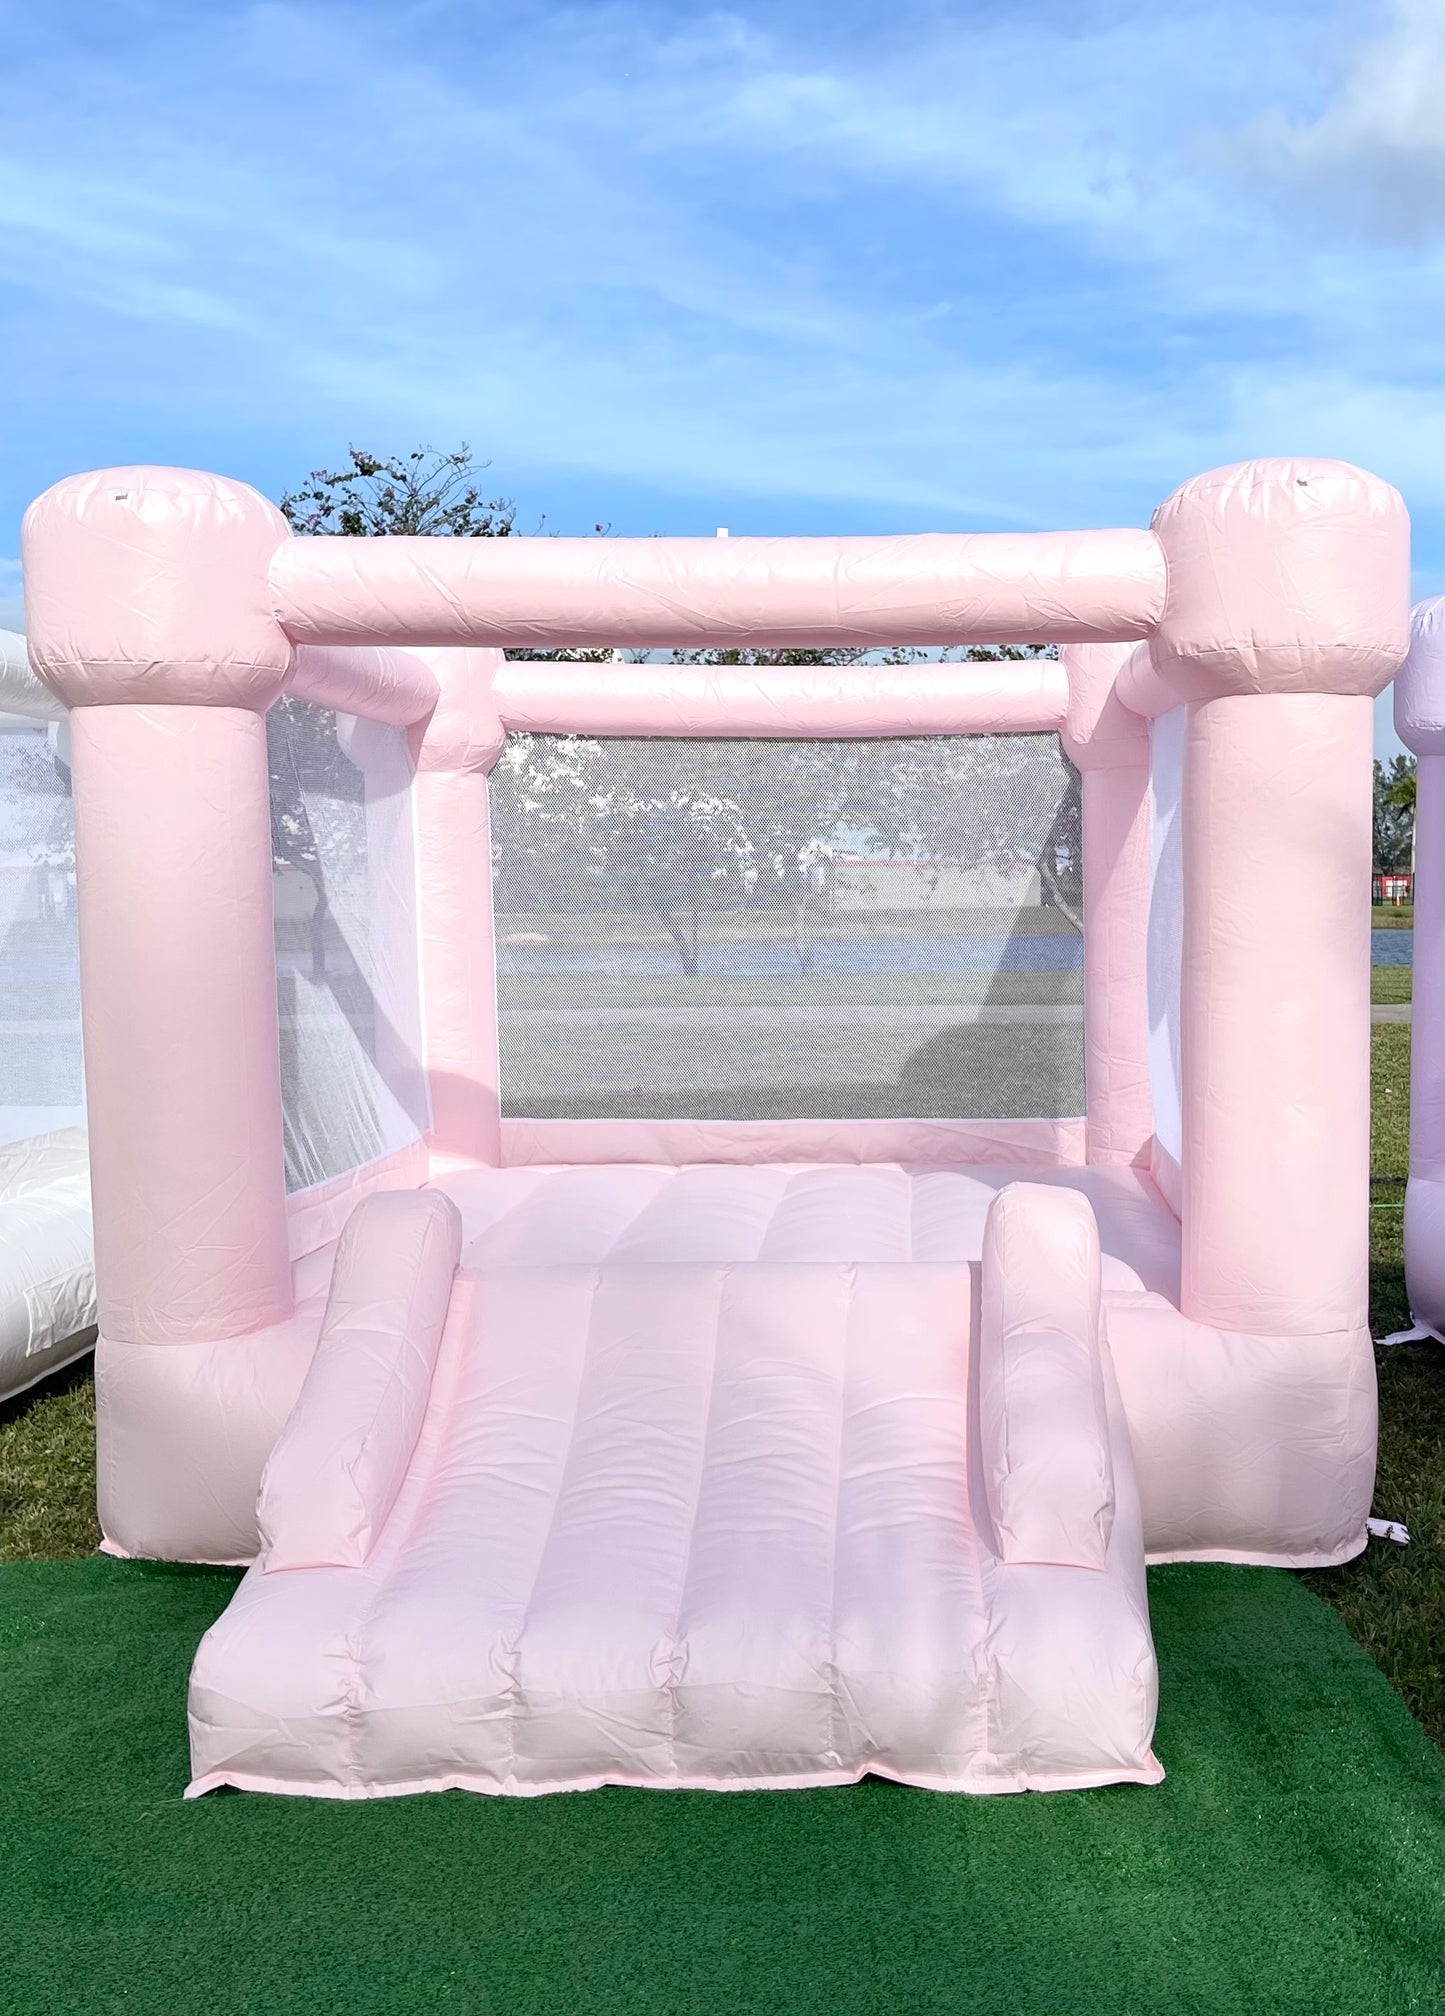 Pink Bounce House | 8x11ft | For kids up to 7 years